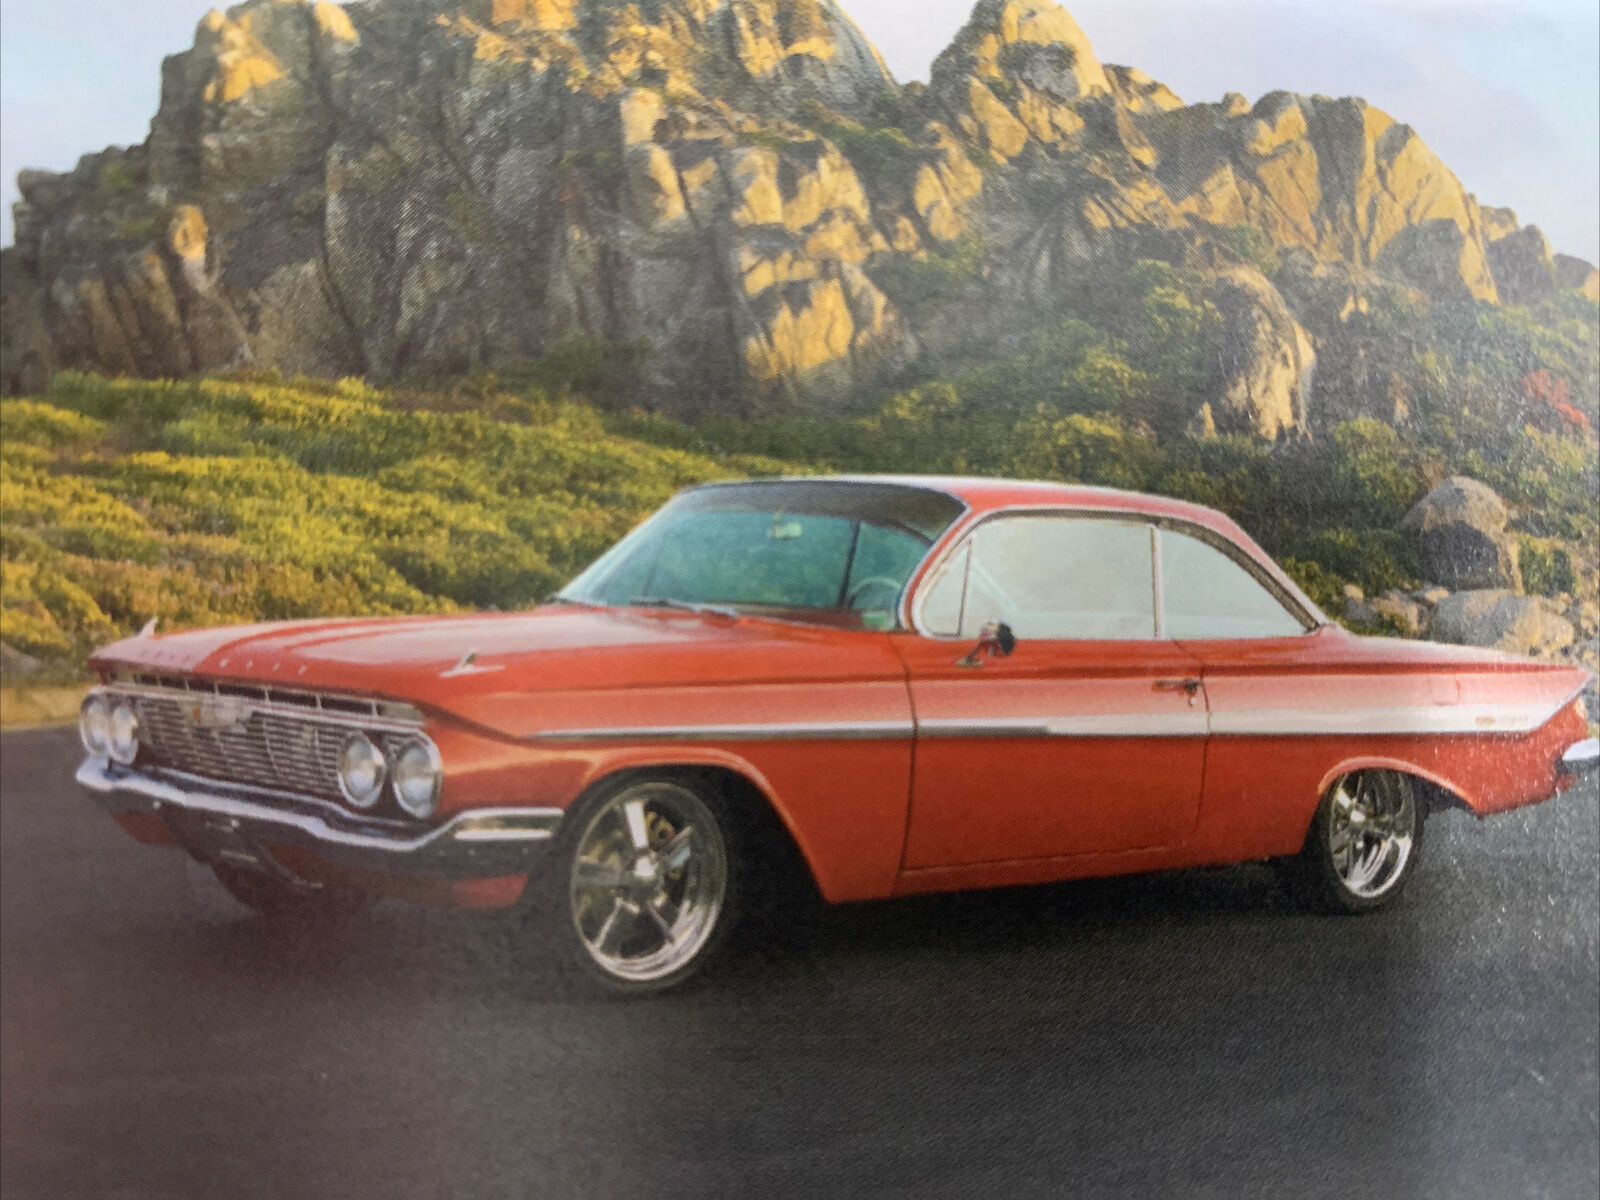 Primary image for 1961 Chevrolet Impala SS Antique Classic Car Fridge Magnet 3.5''x2.75'' NEW